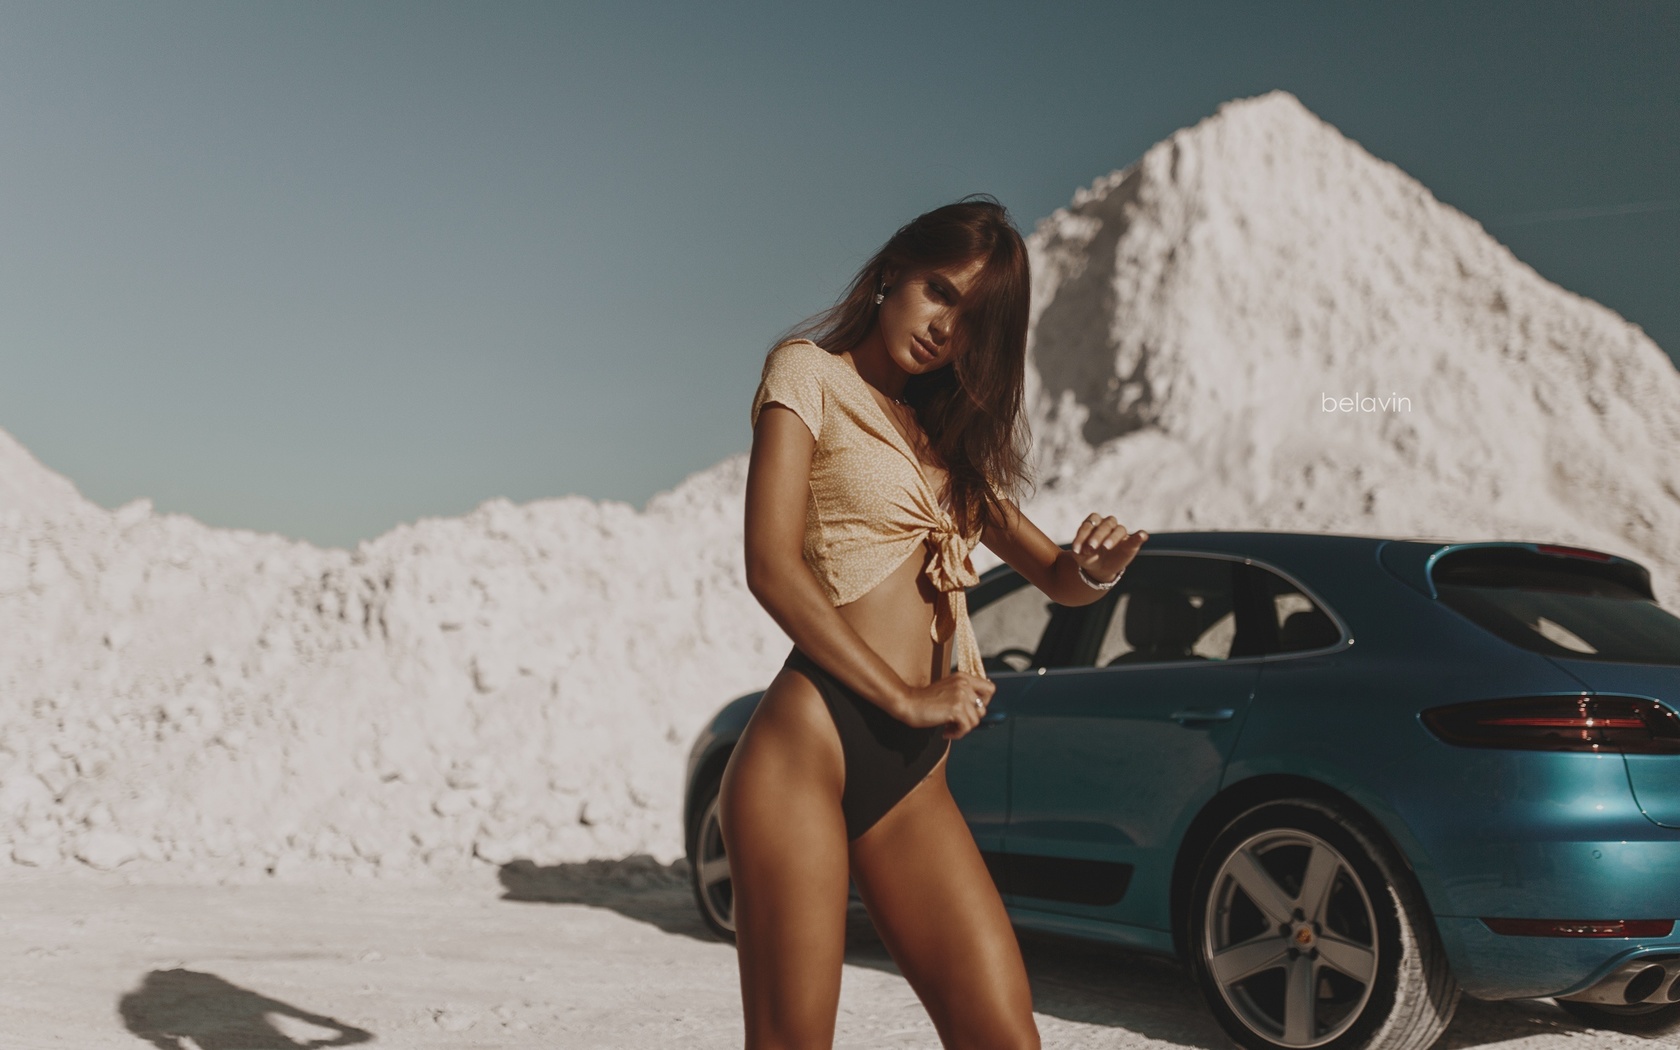 alexander belavin, women, tanned, thong, sunglasses, sneakers, women with cars